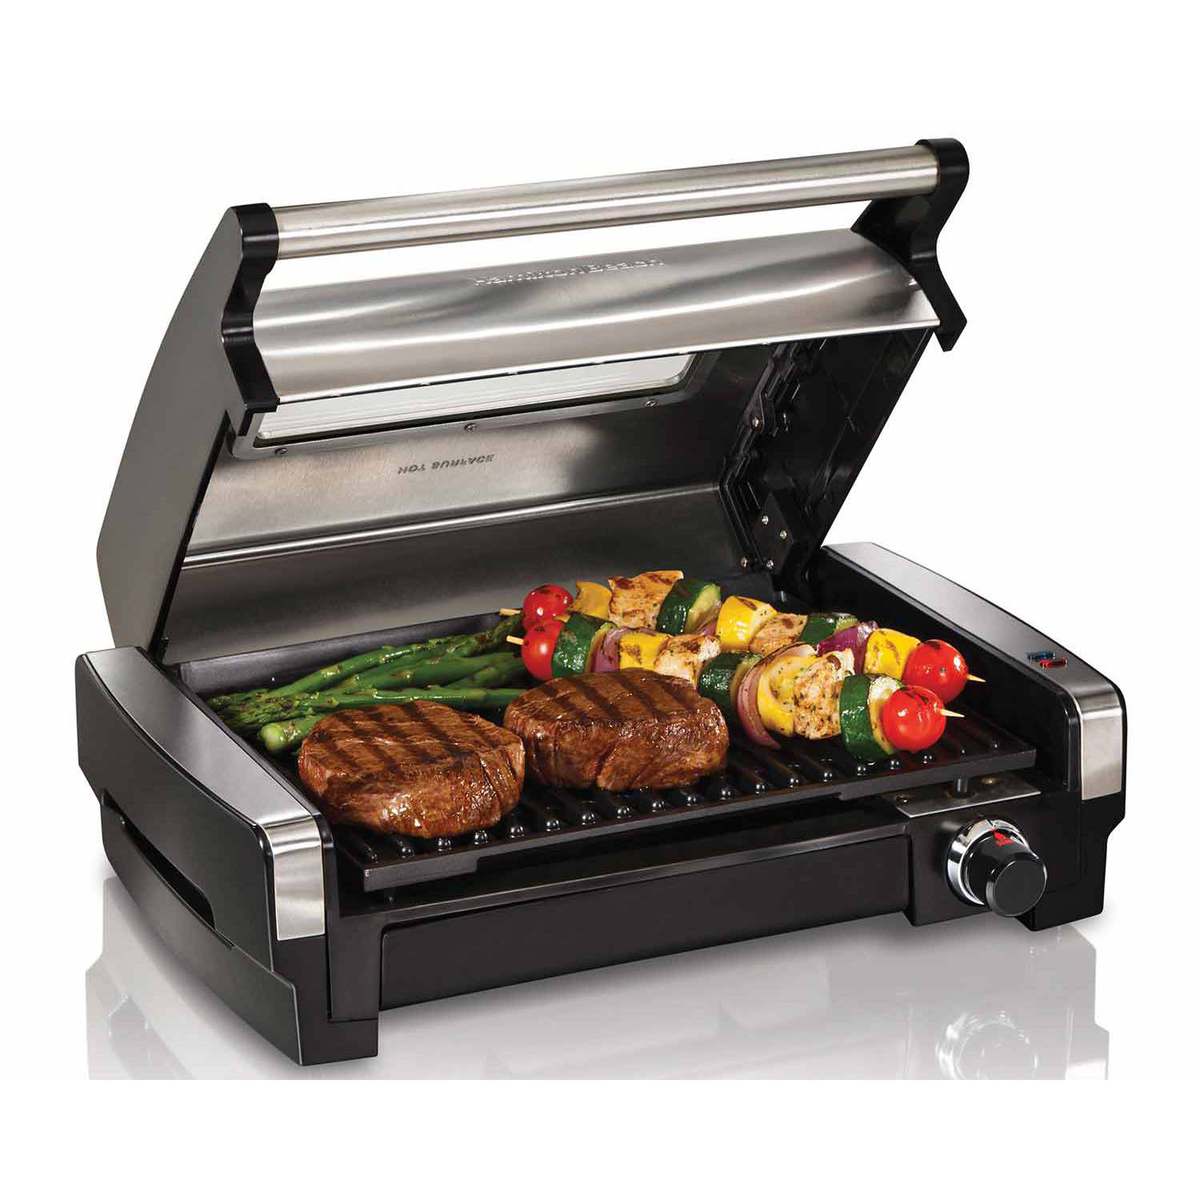 Searing Grill with Lid Window (25361)